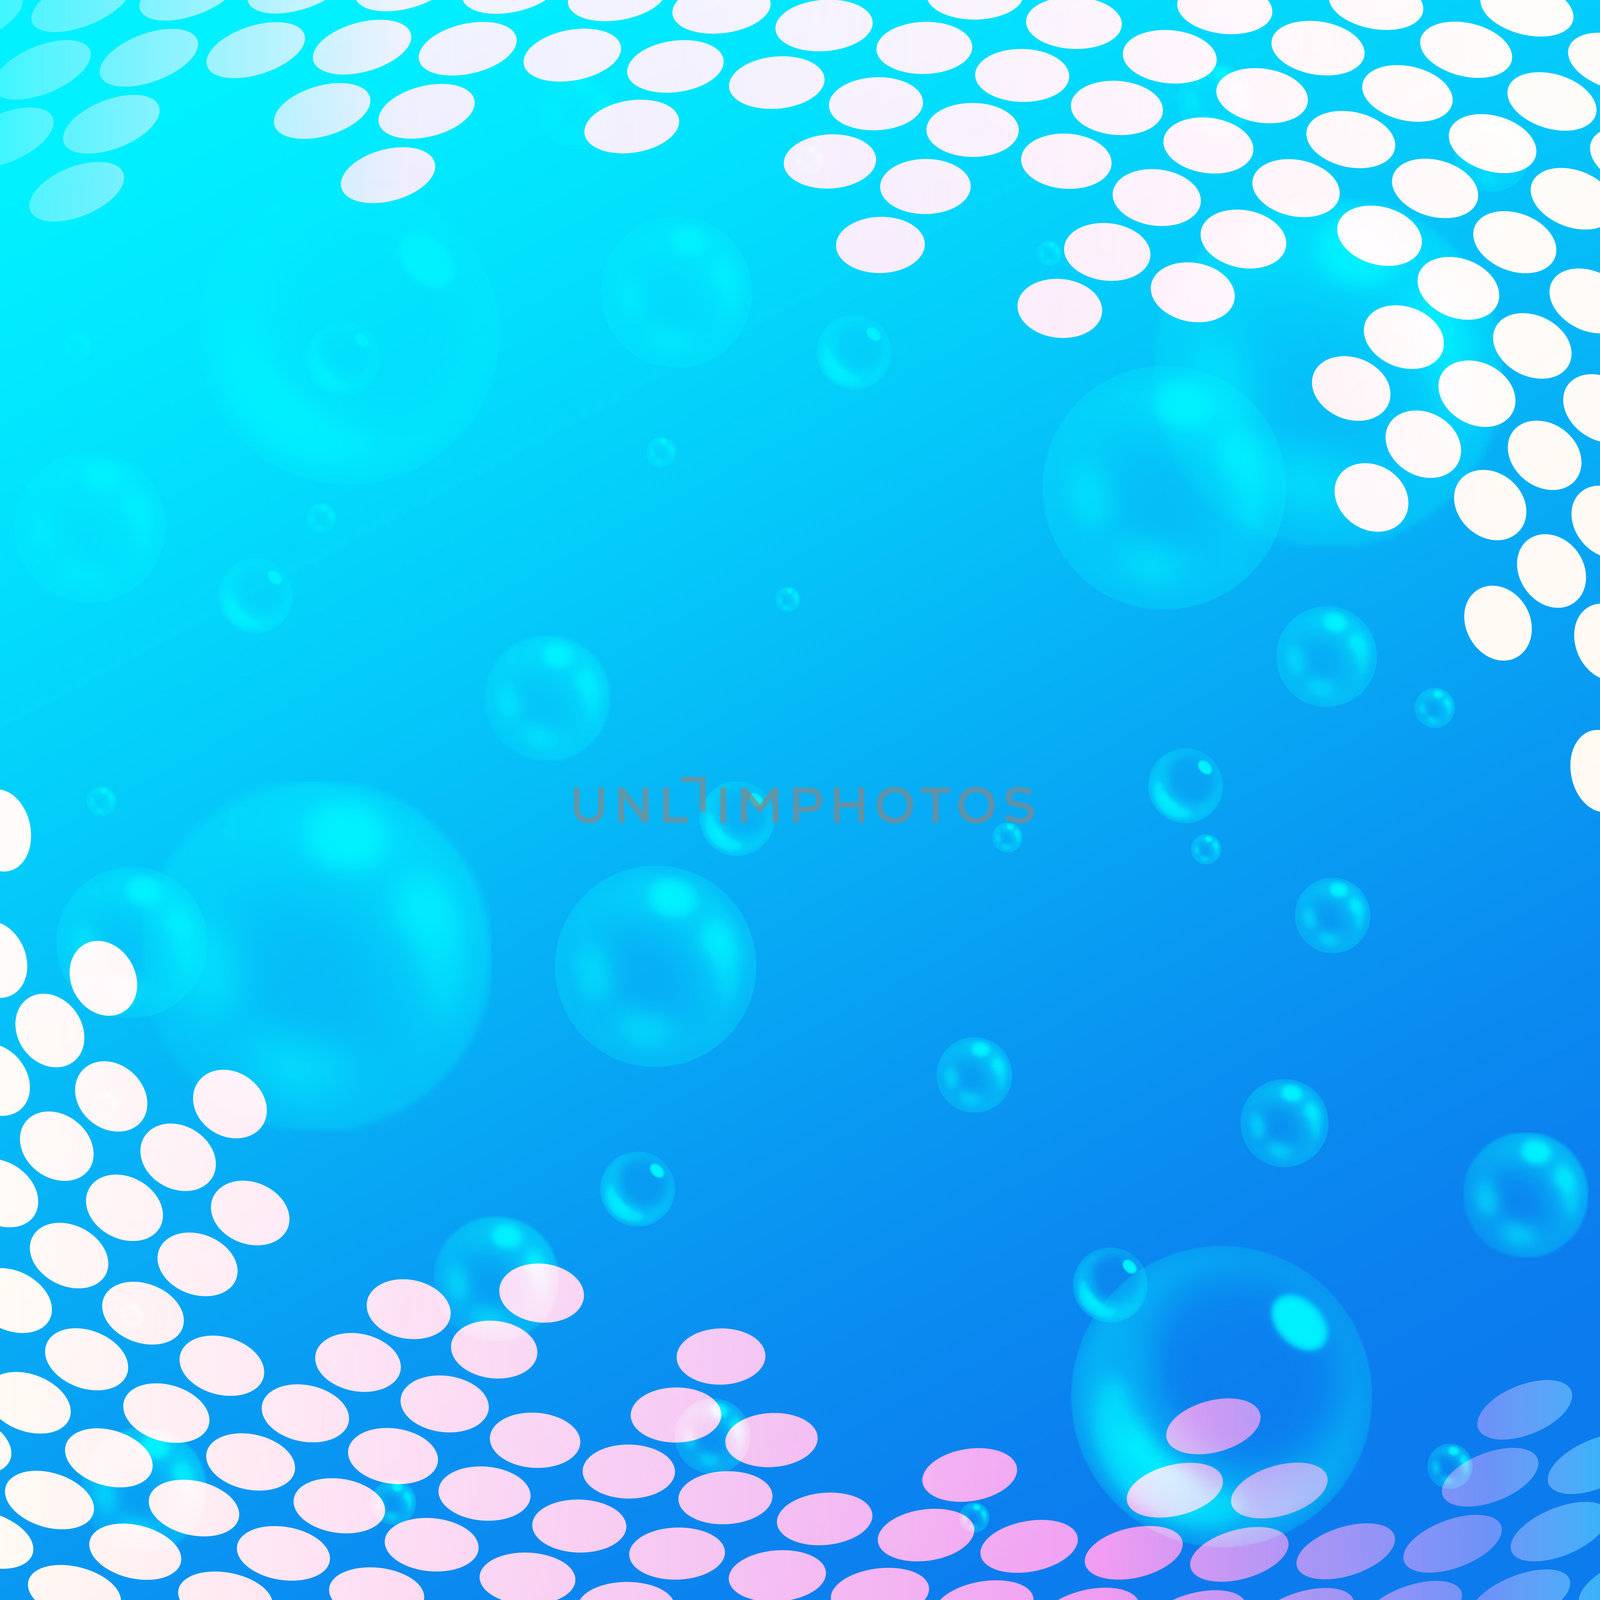 An abstract blue bubbles illustration background.